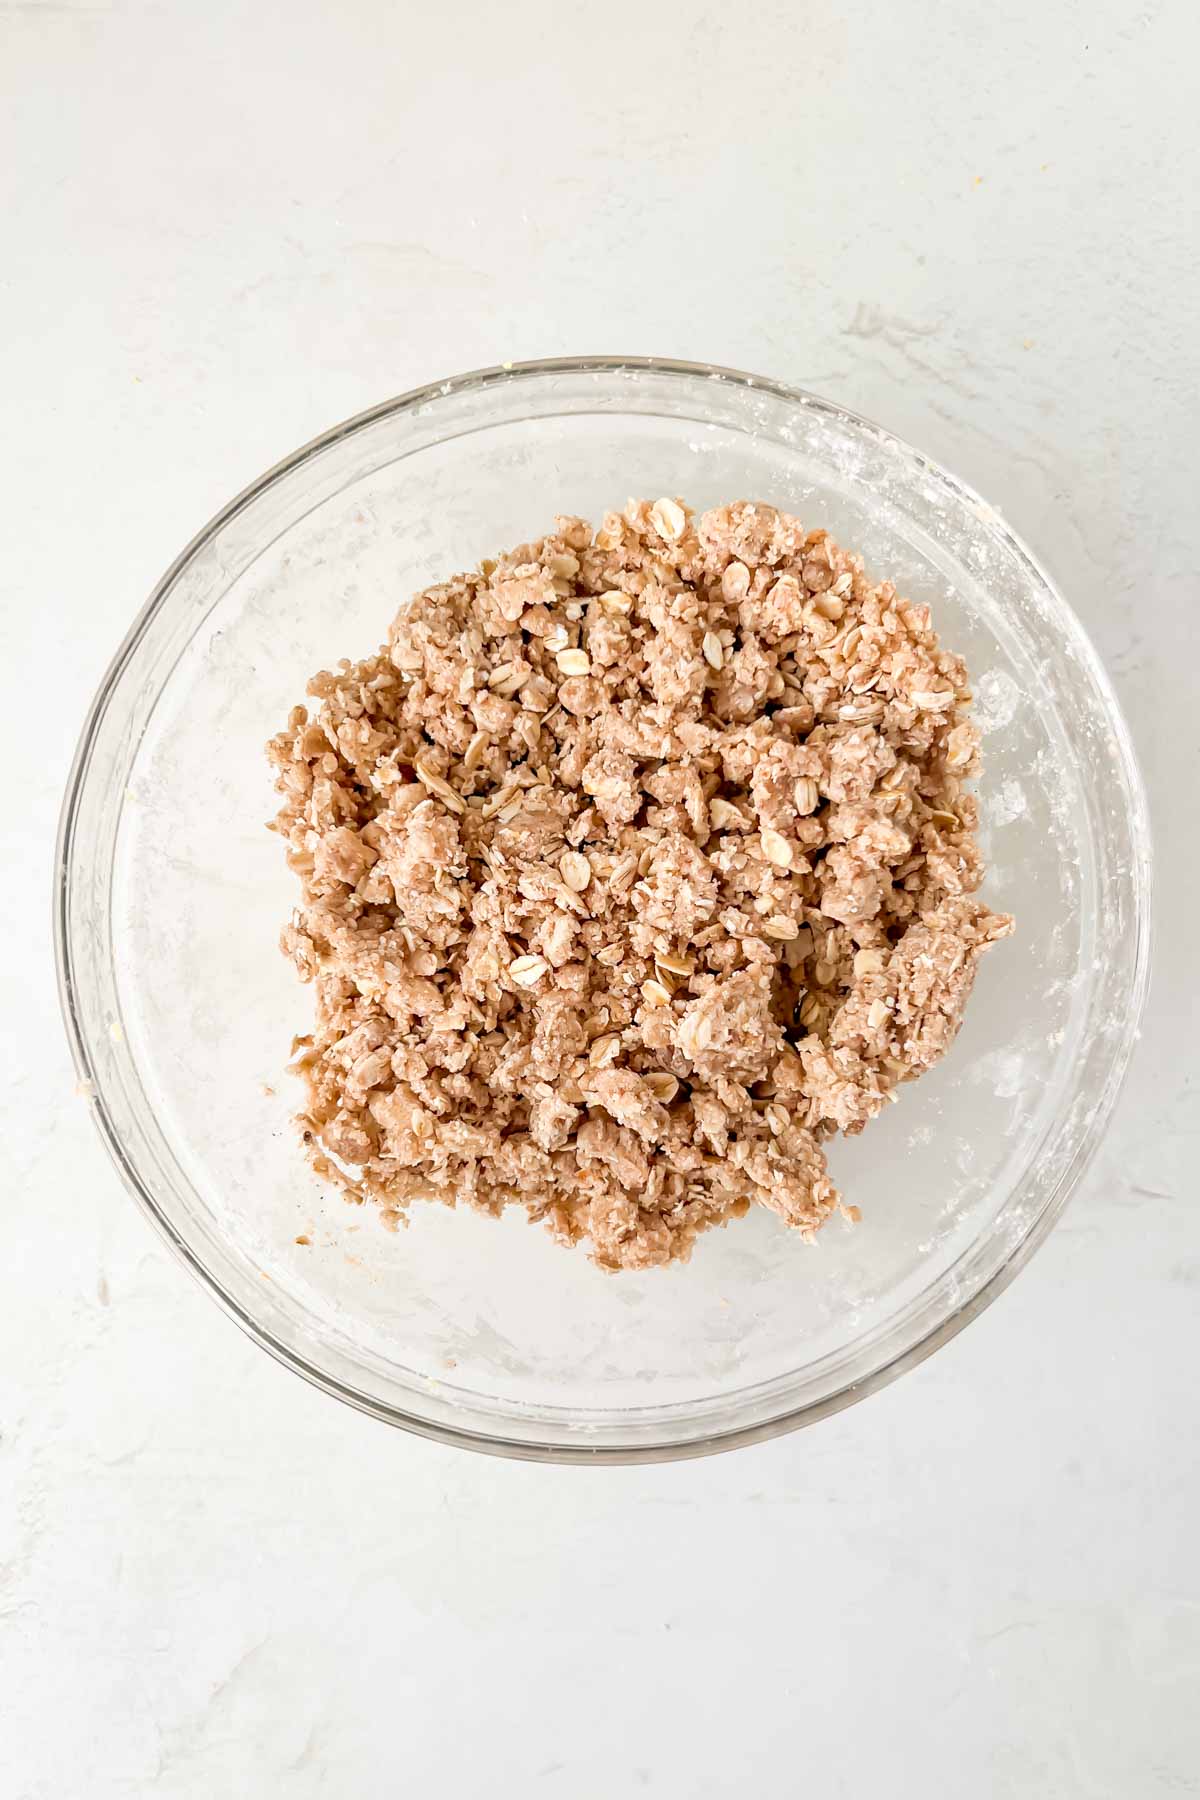 streusel topping mixture folded together in a glass bowl on white background. 